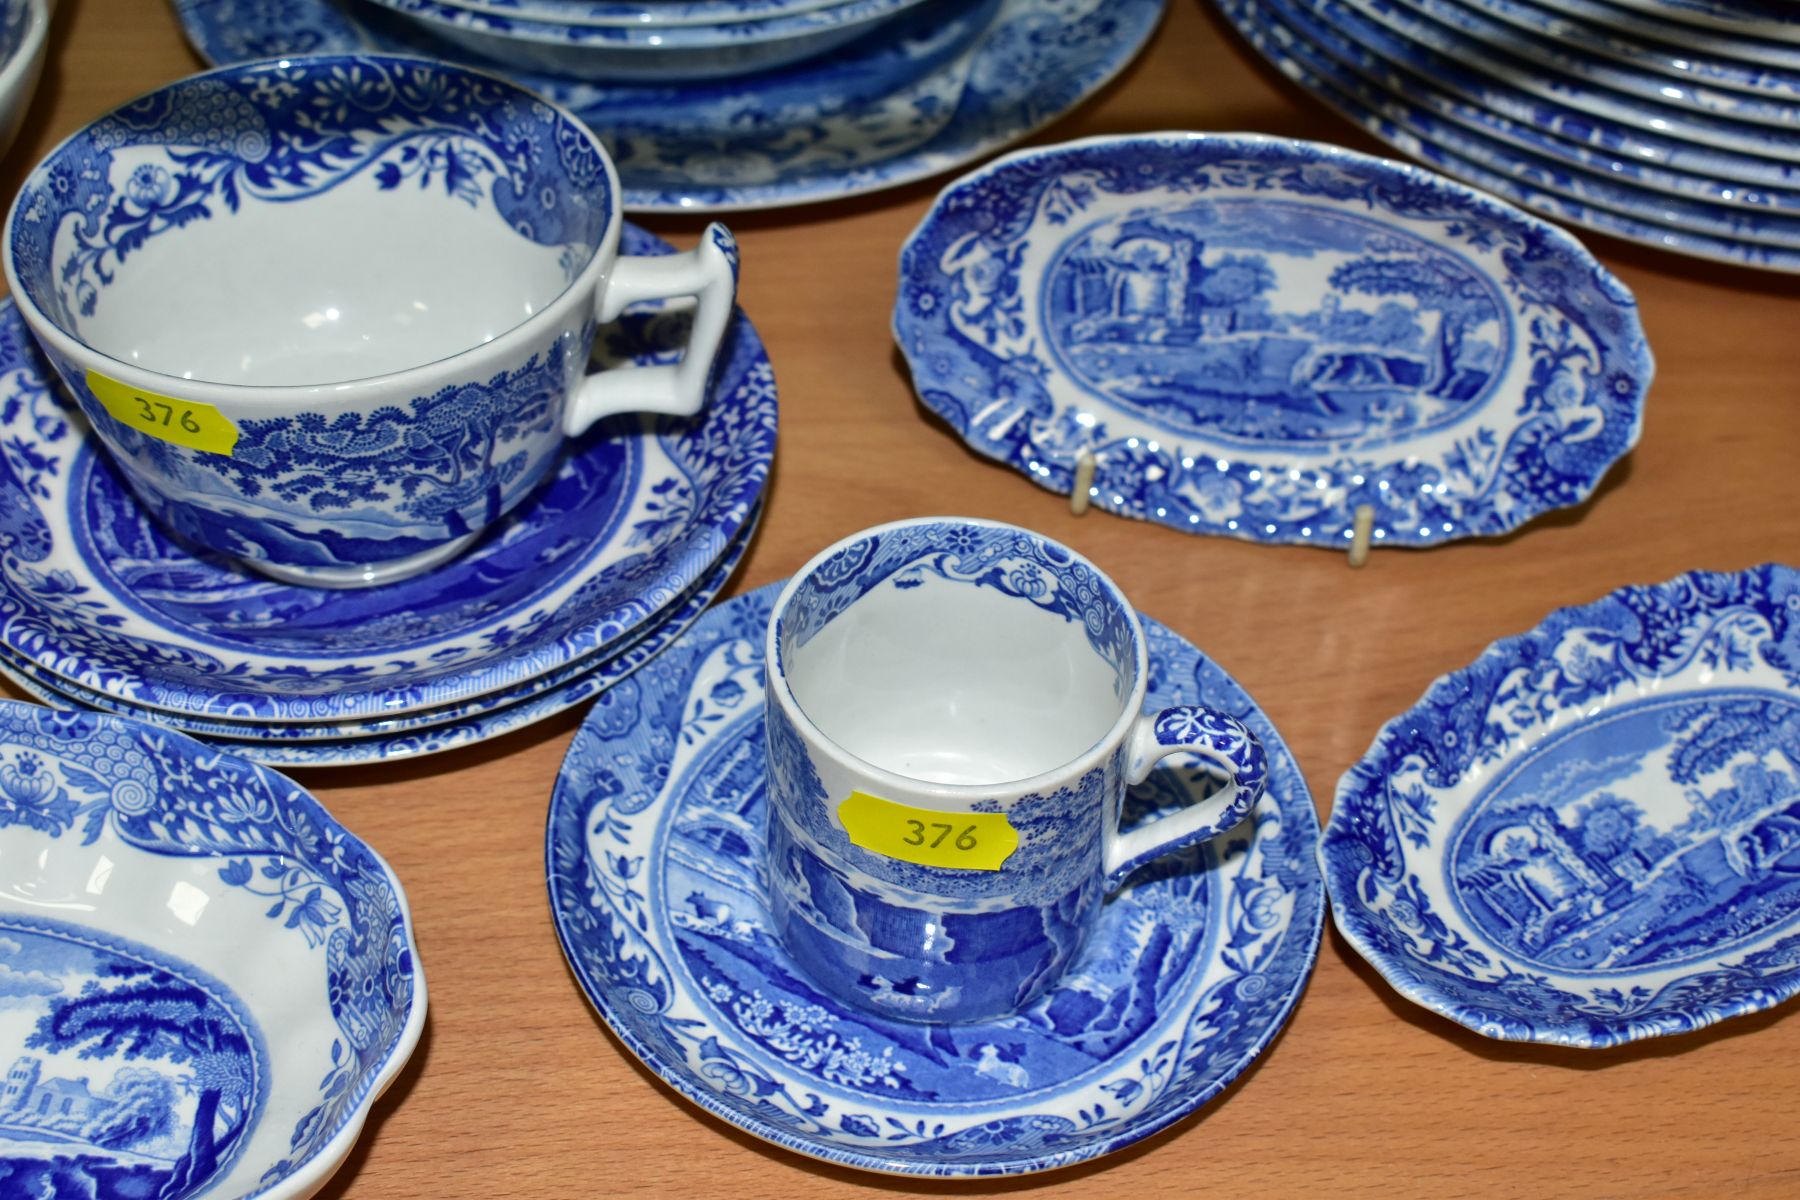 A QUANTITY OF MODERN SPODE ITALIAN SPODE DESIGN DINNER WARES, comprising an 11cm high jug, two small - Image 4 of 10